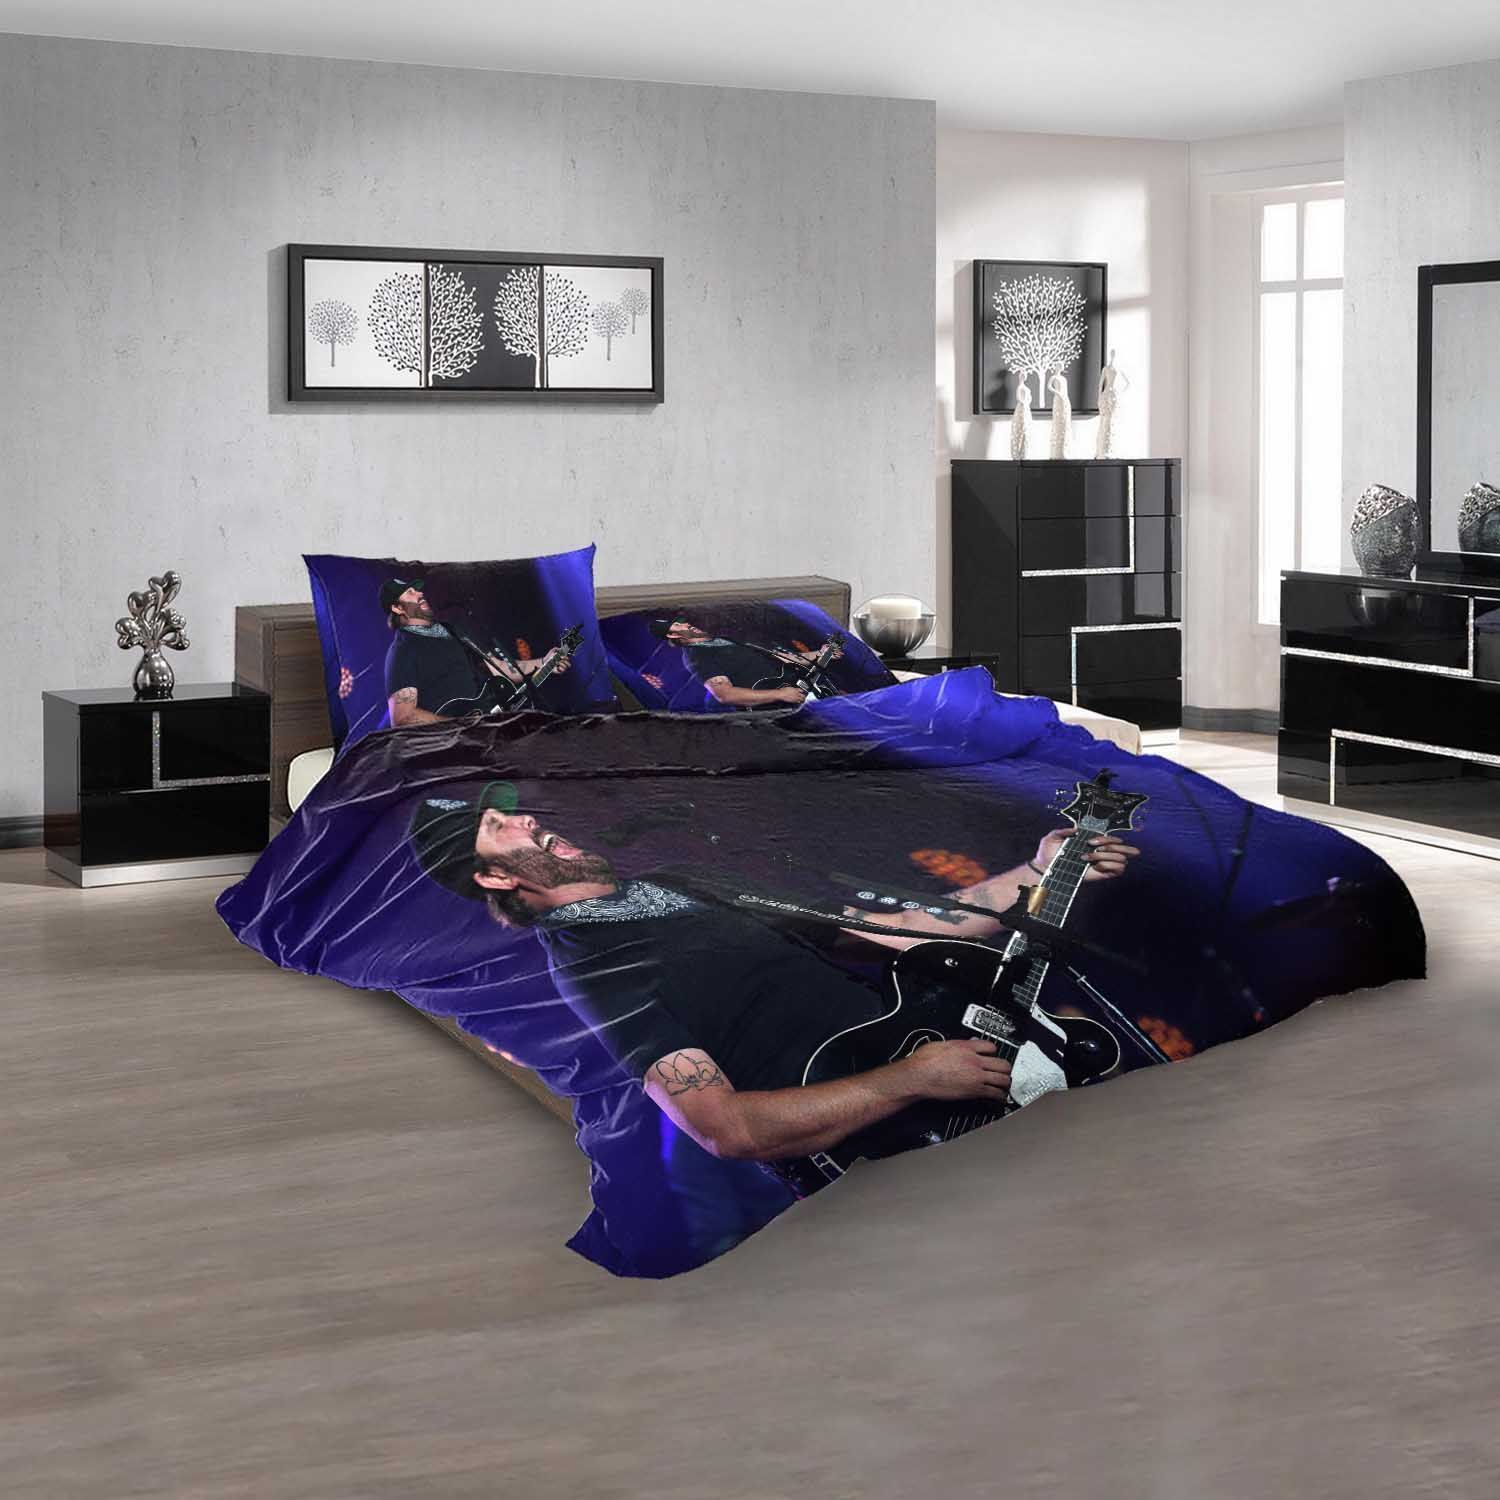 Famous Person Randy Houser N Bedding Sets